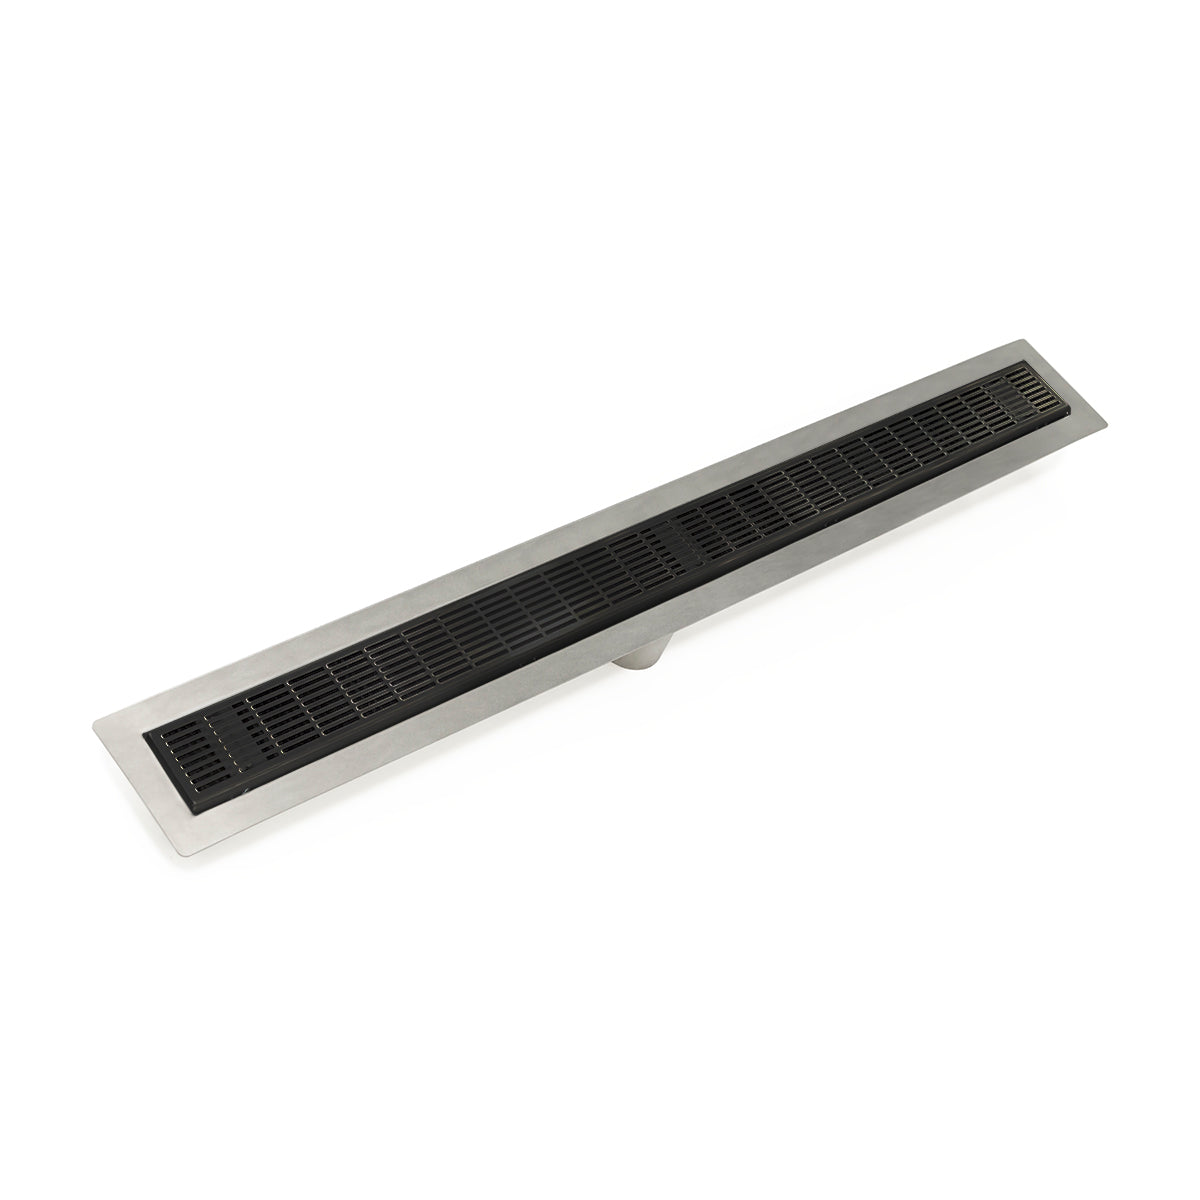 Infinity Drain 36" FF Series Fixed Flange Linear Drain Kit with 2 1/2" Perforated Slotted Grate